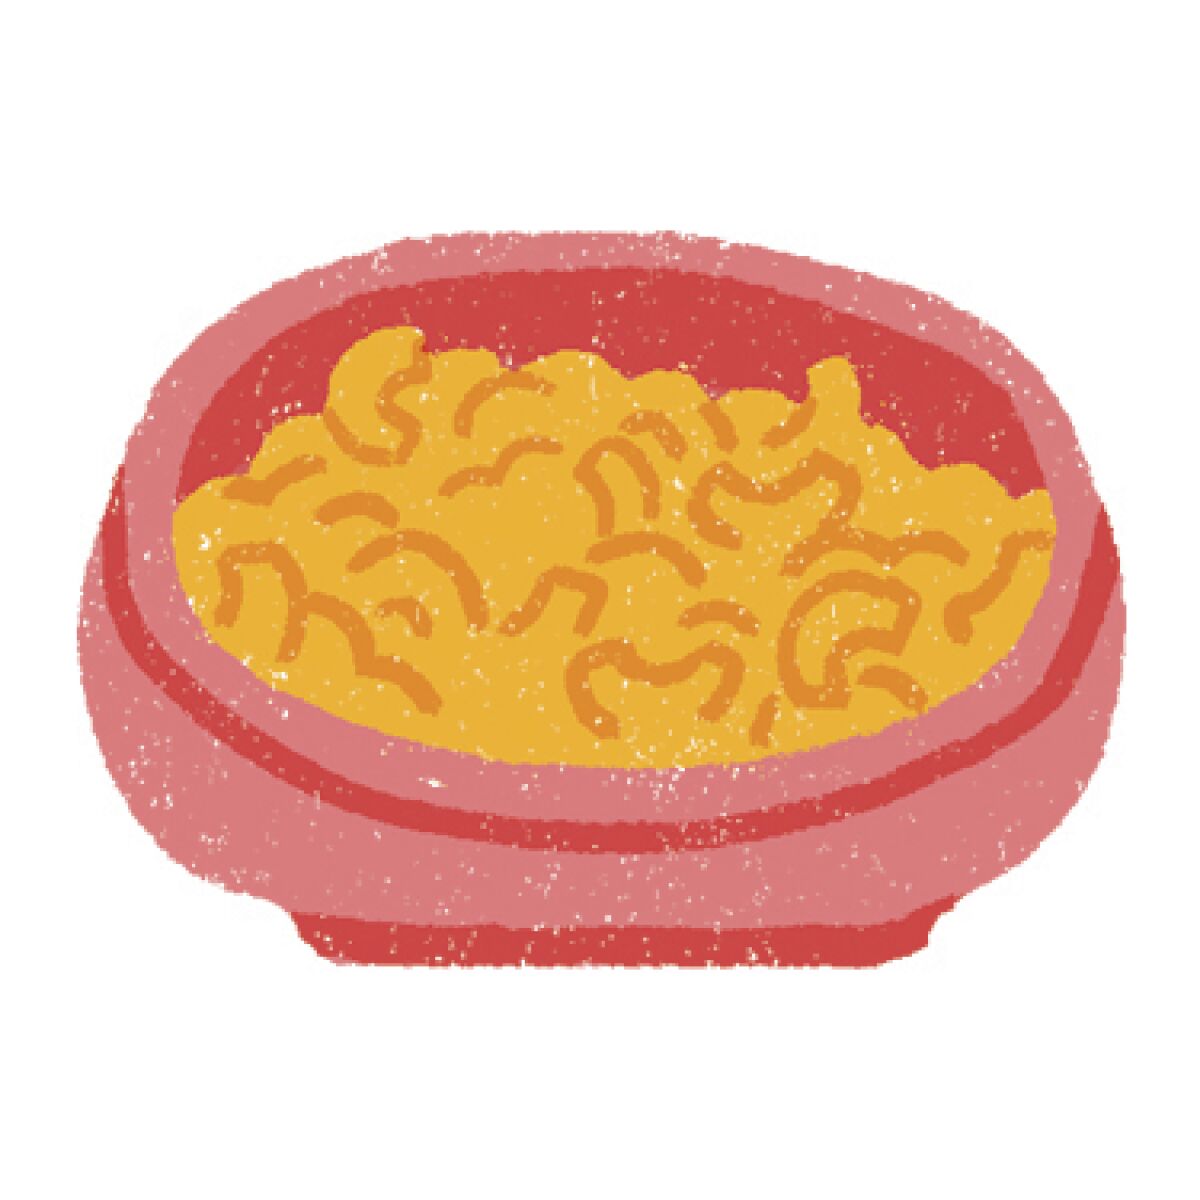 Macaroni and cheese is in the top half of tastiest Thanksgiving foods, but it's also surprisingly high on the Family Strife scale.